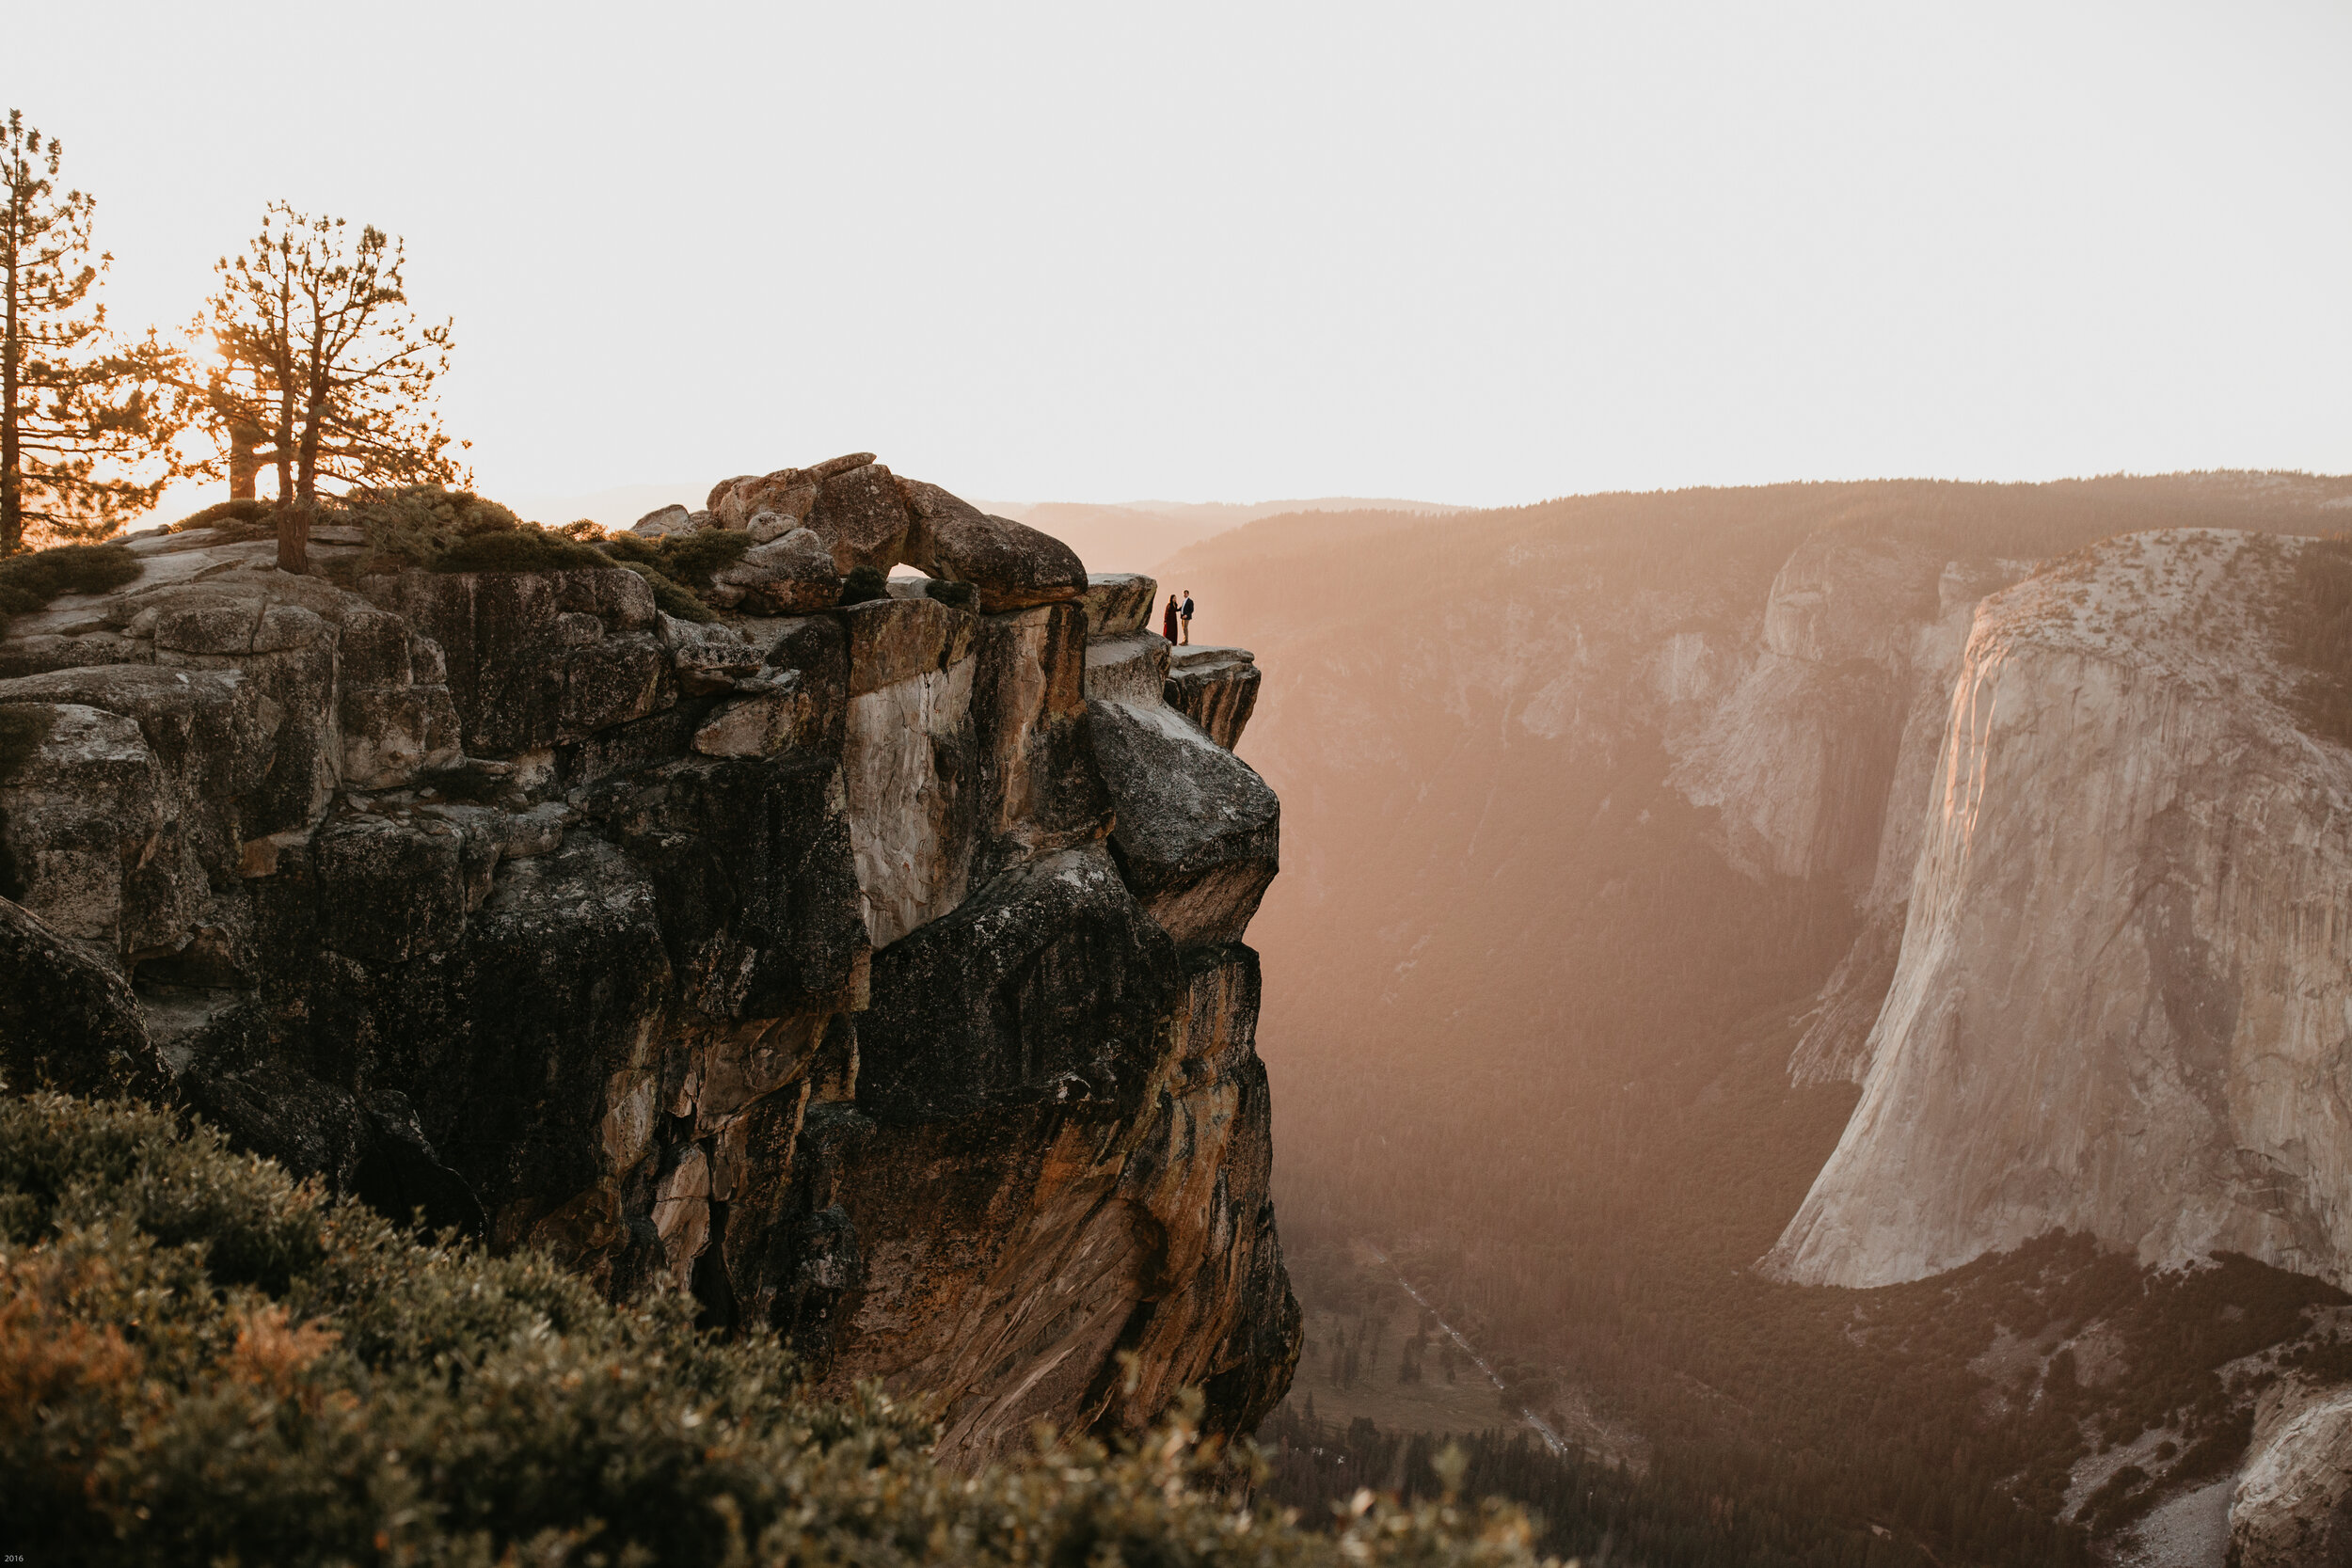 yosemite-national-park-couples-session-at-taft-point-and-yosemite-valley-yosemite-elopement-photographer-nicole-daacke-photography-155.jpg